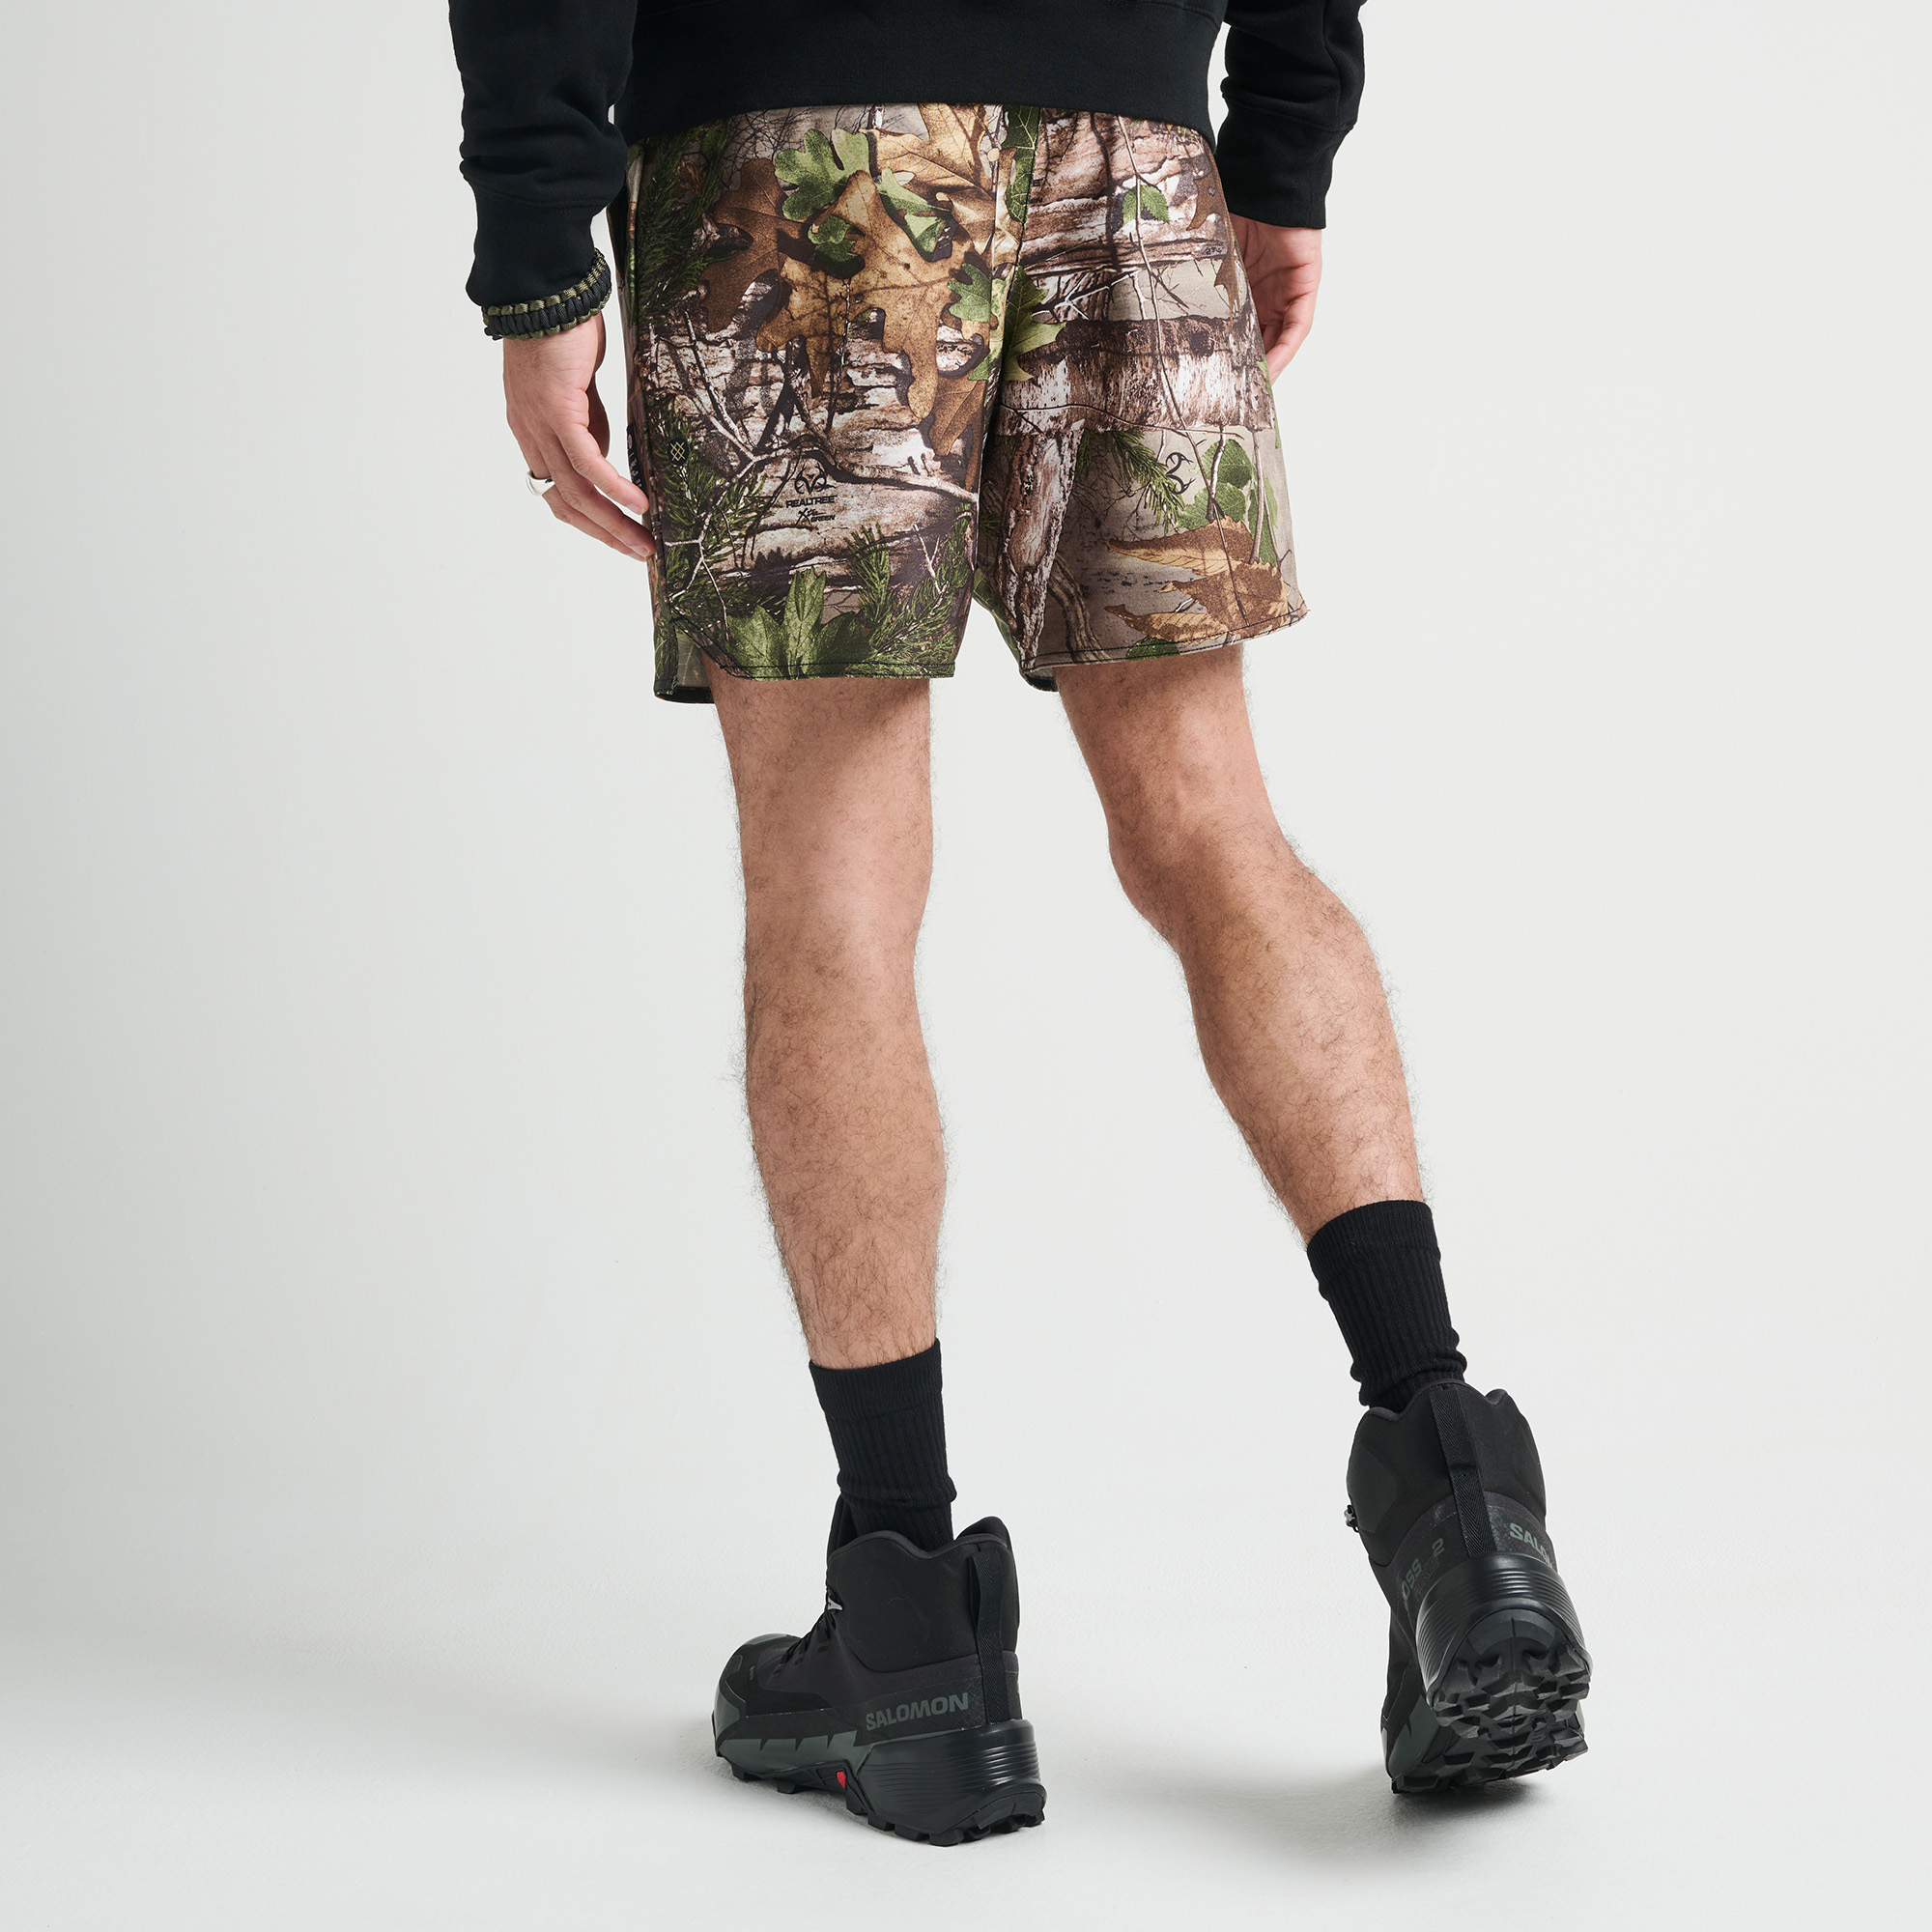 Stance Athletic Bike Shorts | Xtra for Women's, Size XS from Realtree